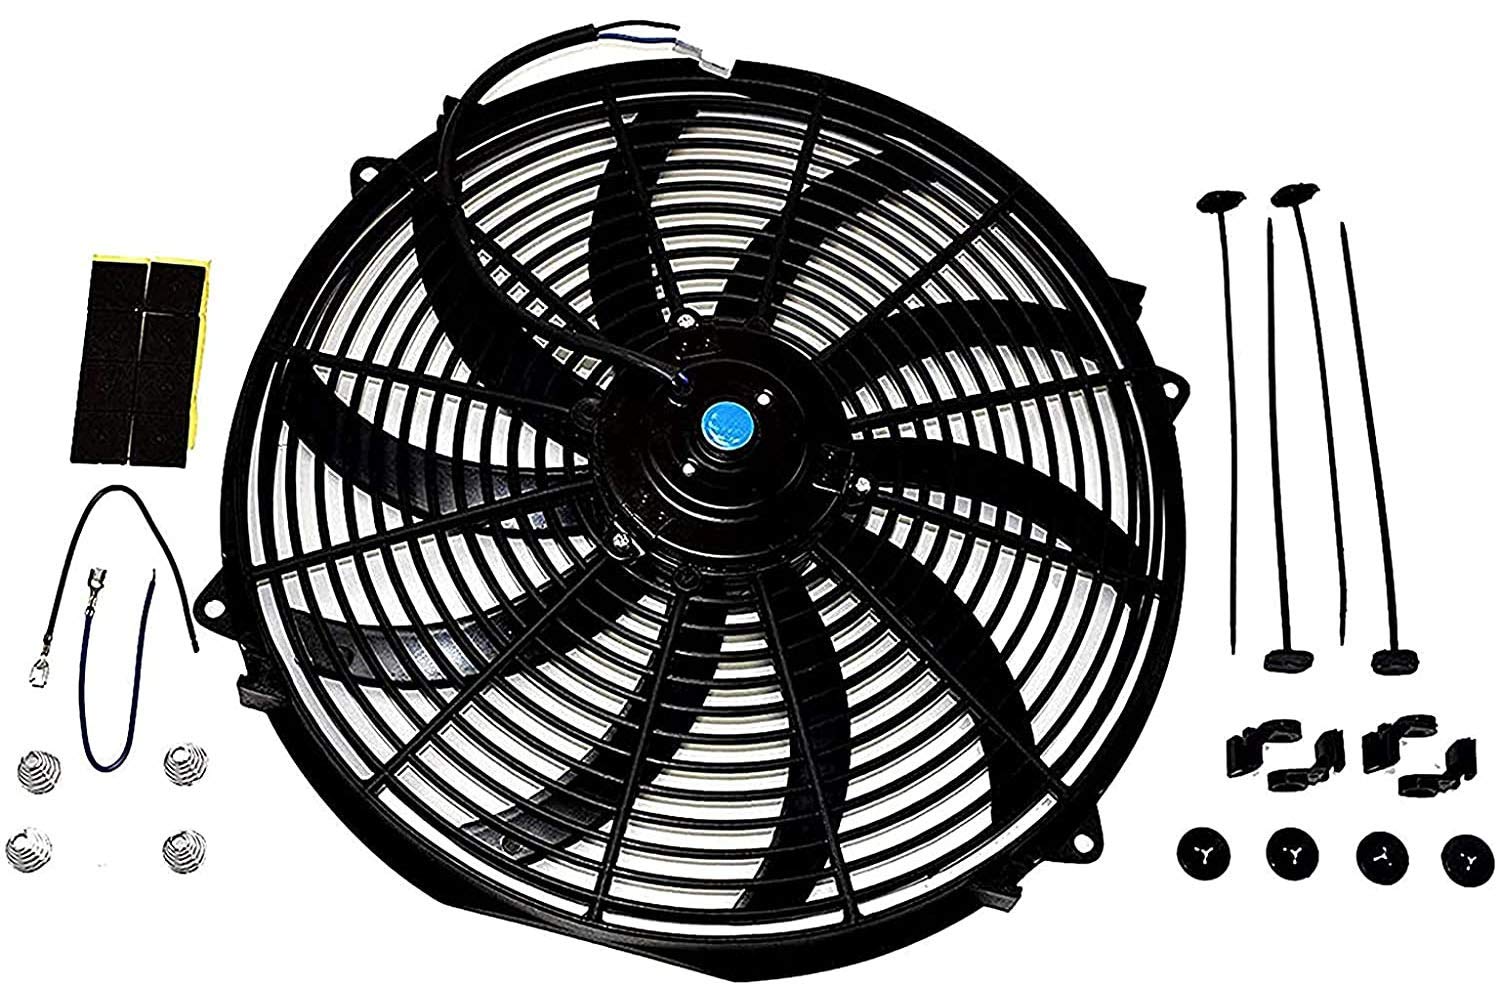 A-Team Performance 130031 Auto Engine Radiator Cooling Fan